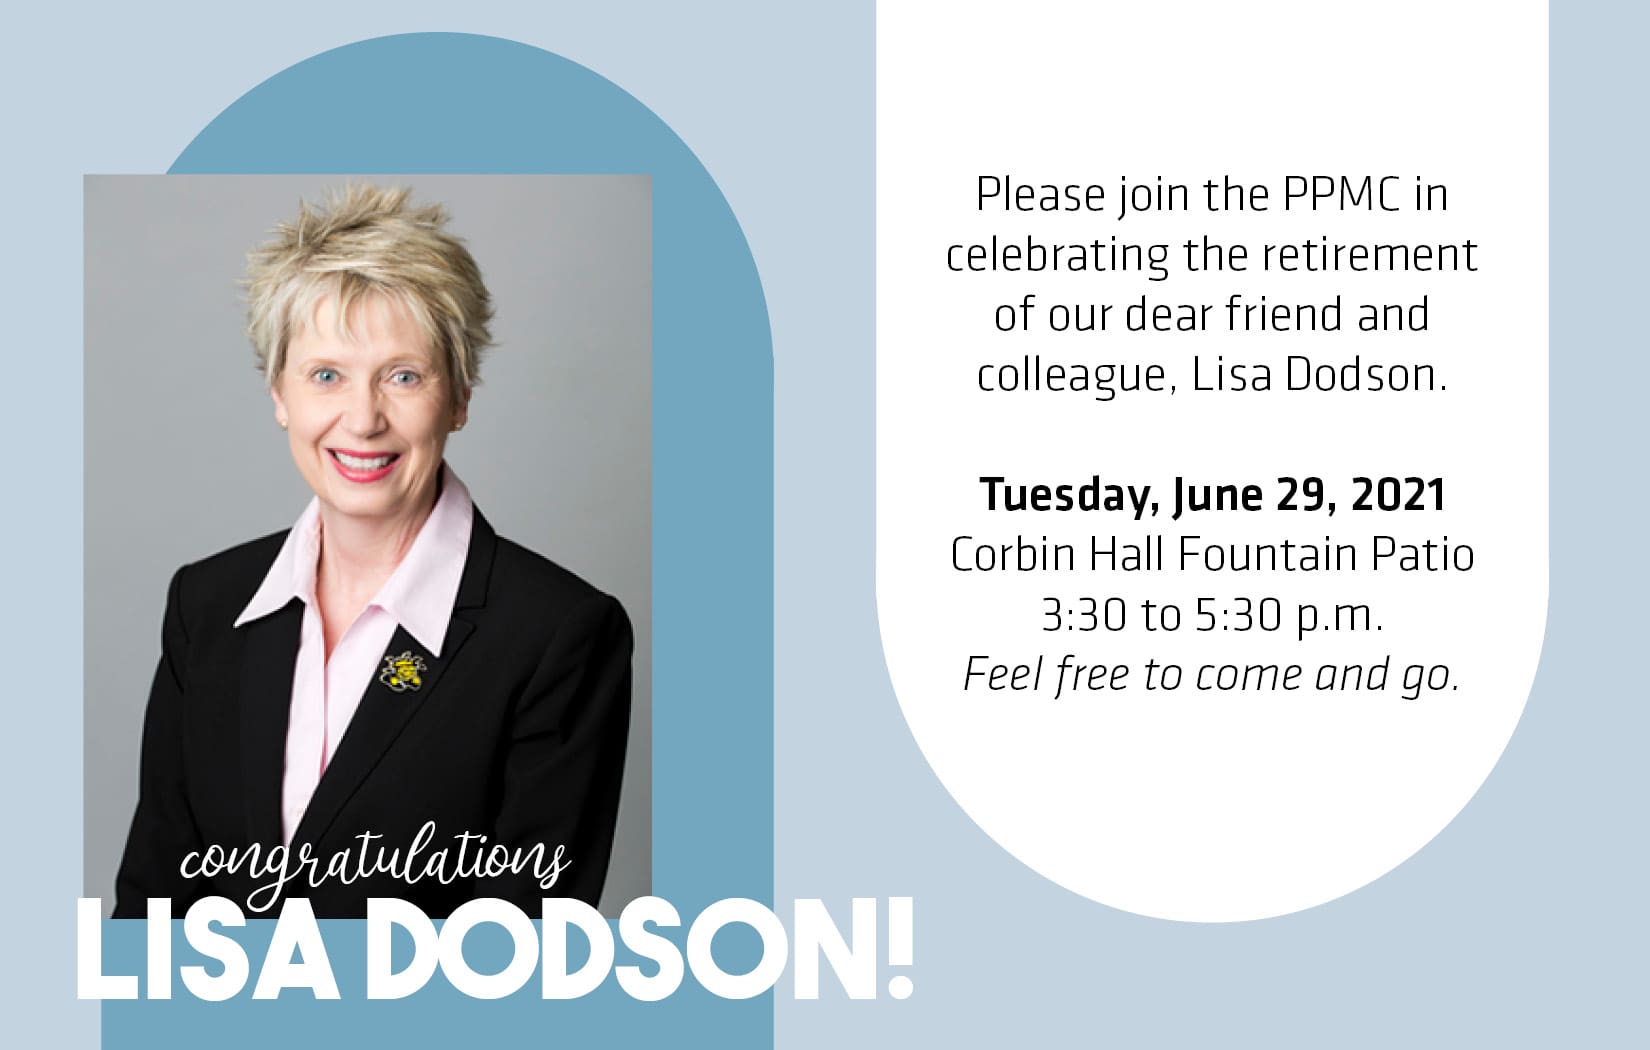 Please join us to celebrate Lisa Dodson’s retirement on Tuesday, June 29, 2021 from 3:30-5:00 p.m. at the Corbin Hall Fountain Patio. Feel free to come and go.